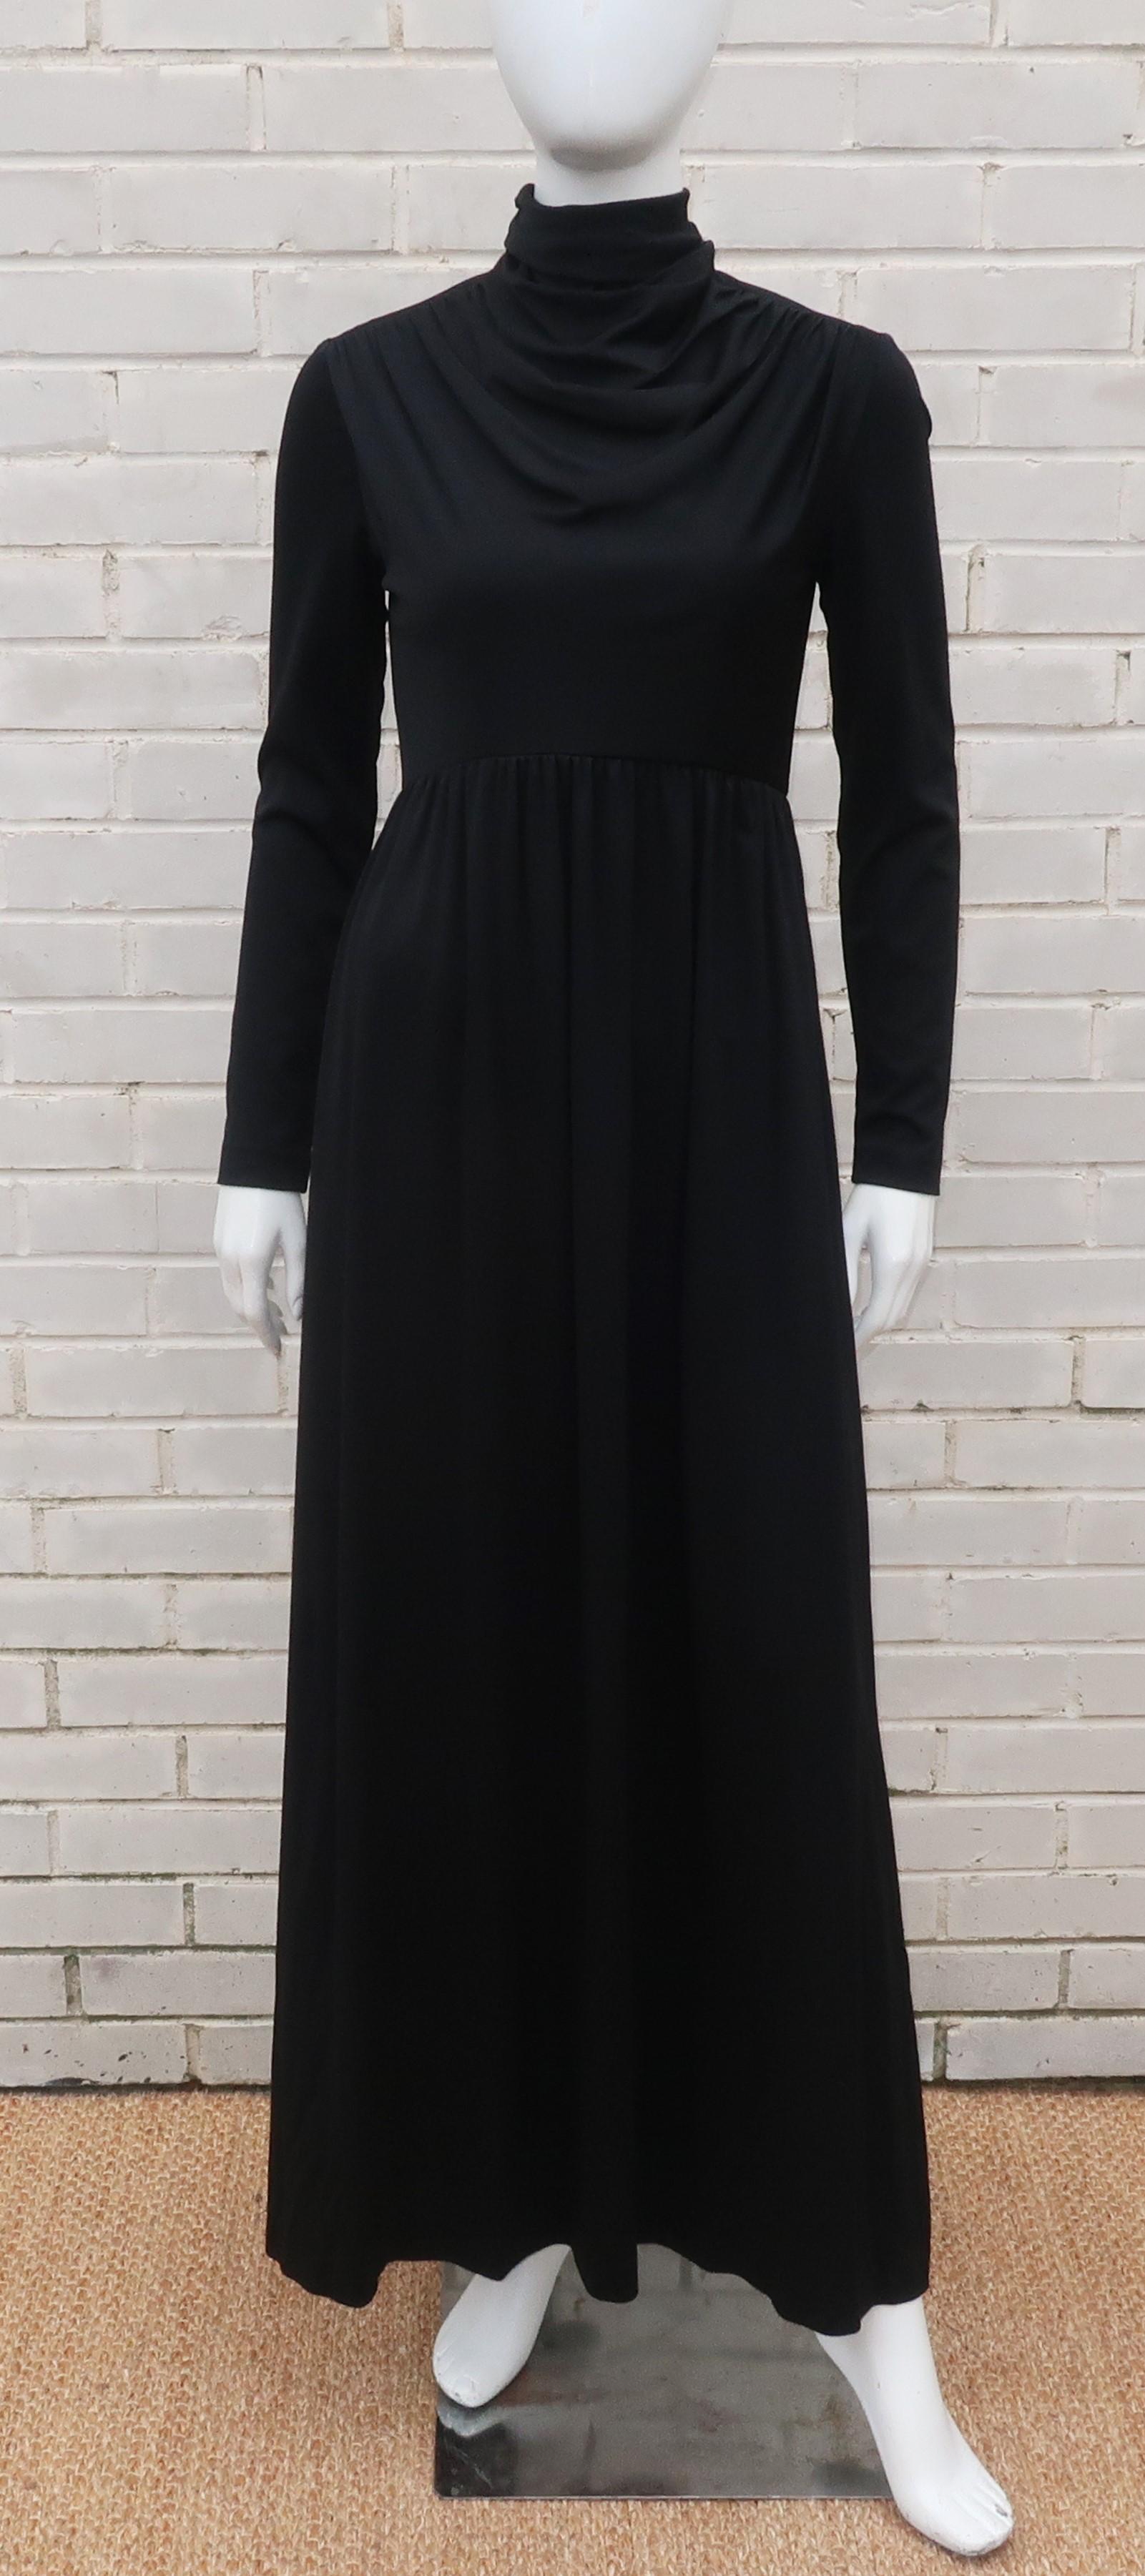 C.1970 Saks Fifth Avenue black jersey maxi dress with a fitted bodice, long sleeves and a draping cowl neck.  The dress zips at the back with a slinky fitted silhouette.  Perfect for a casual evening out or at home hostess wear.
CONDITION
Very good